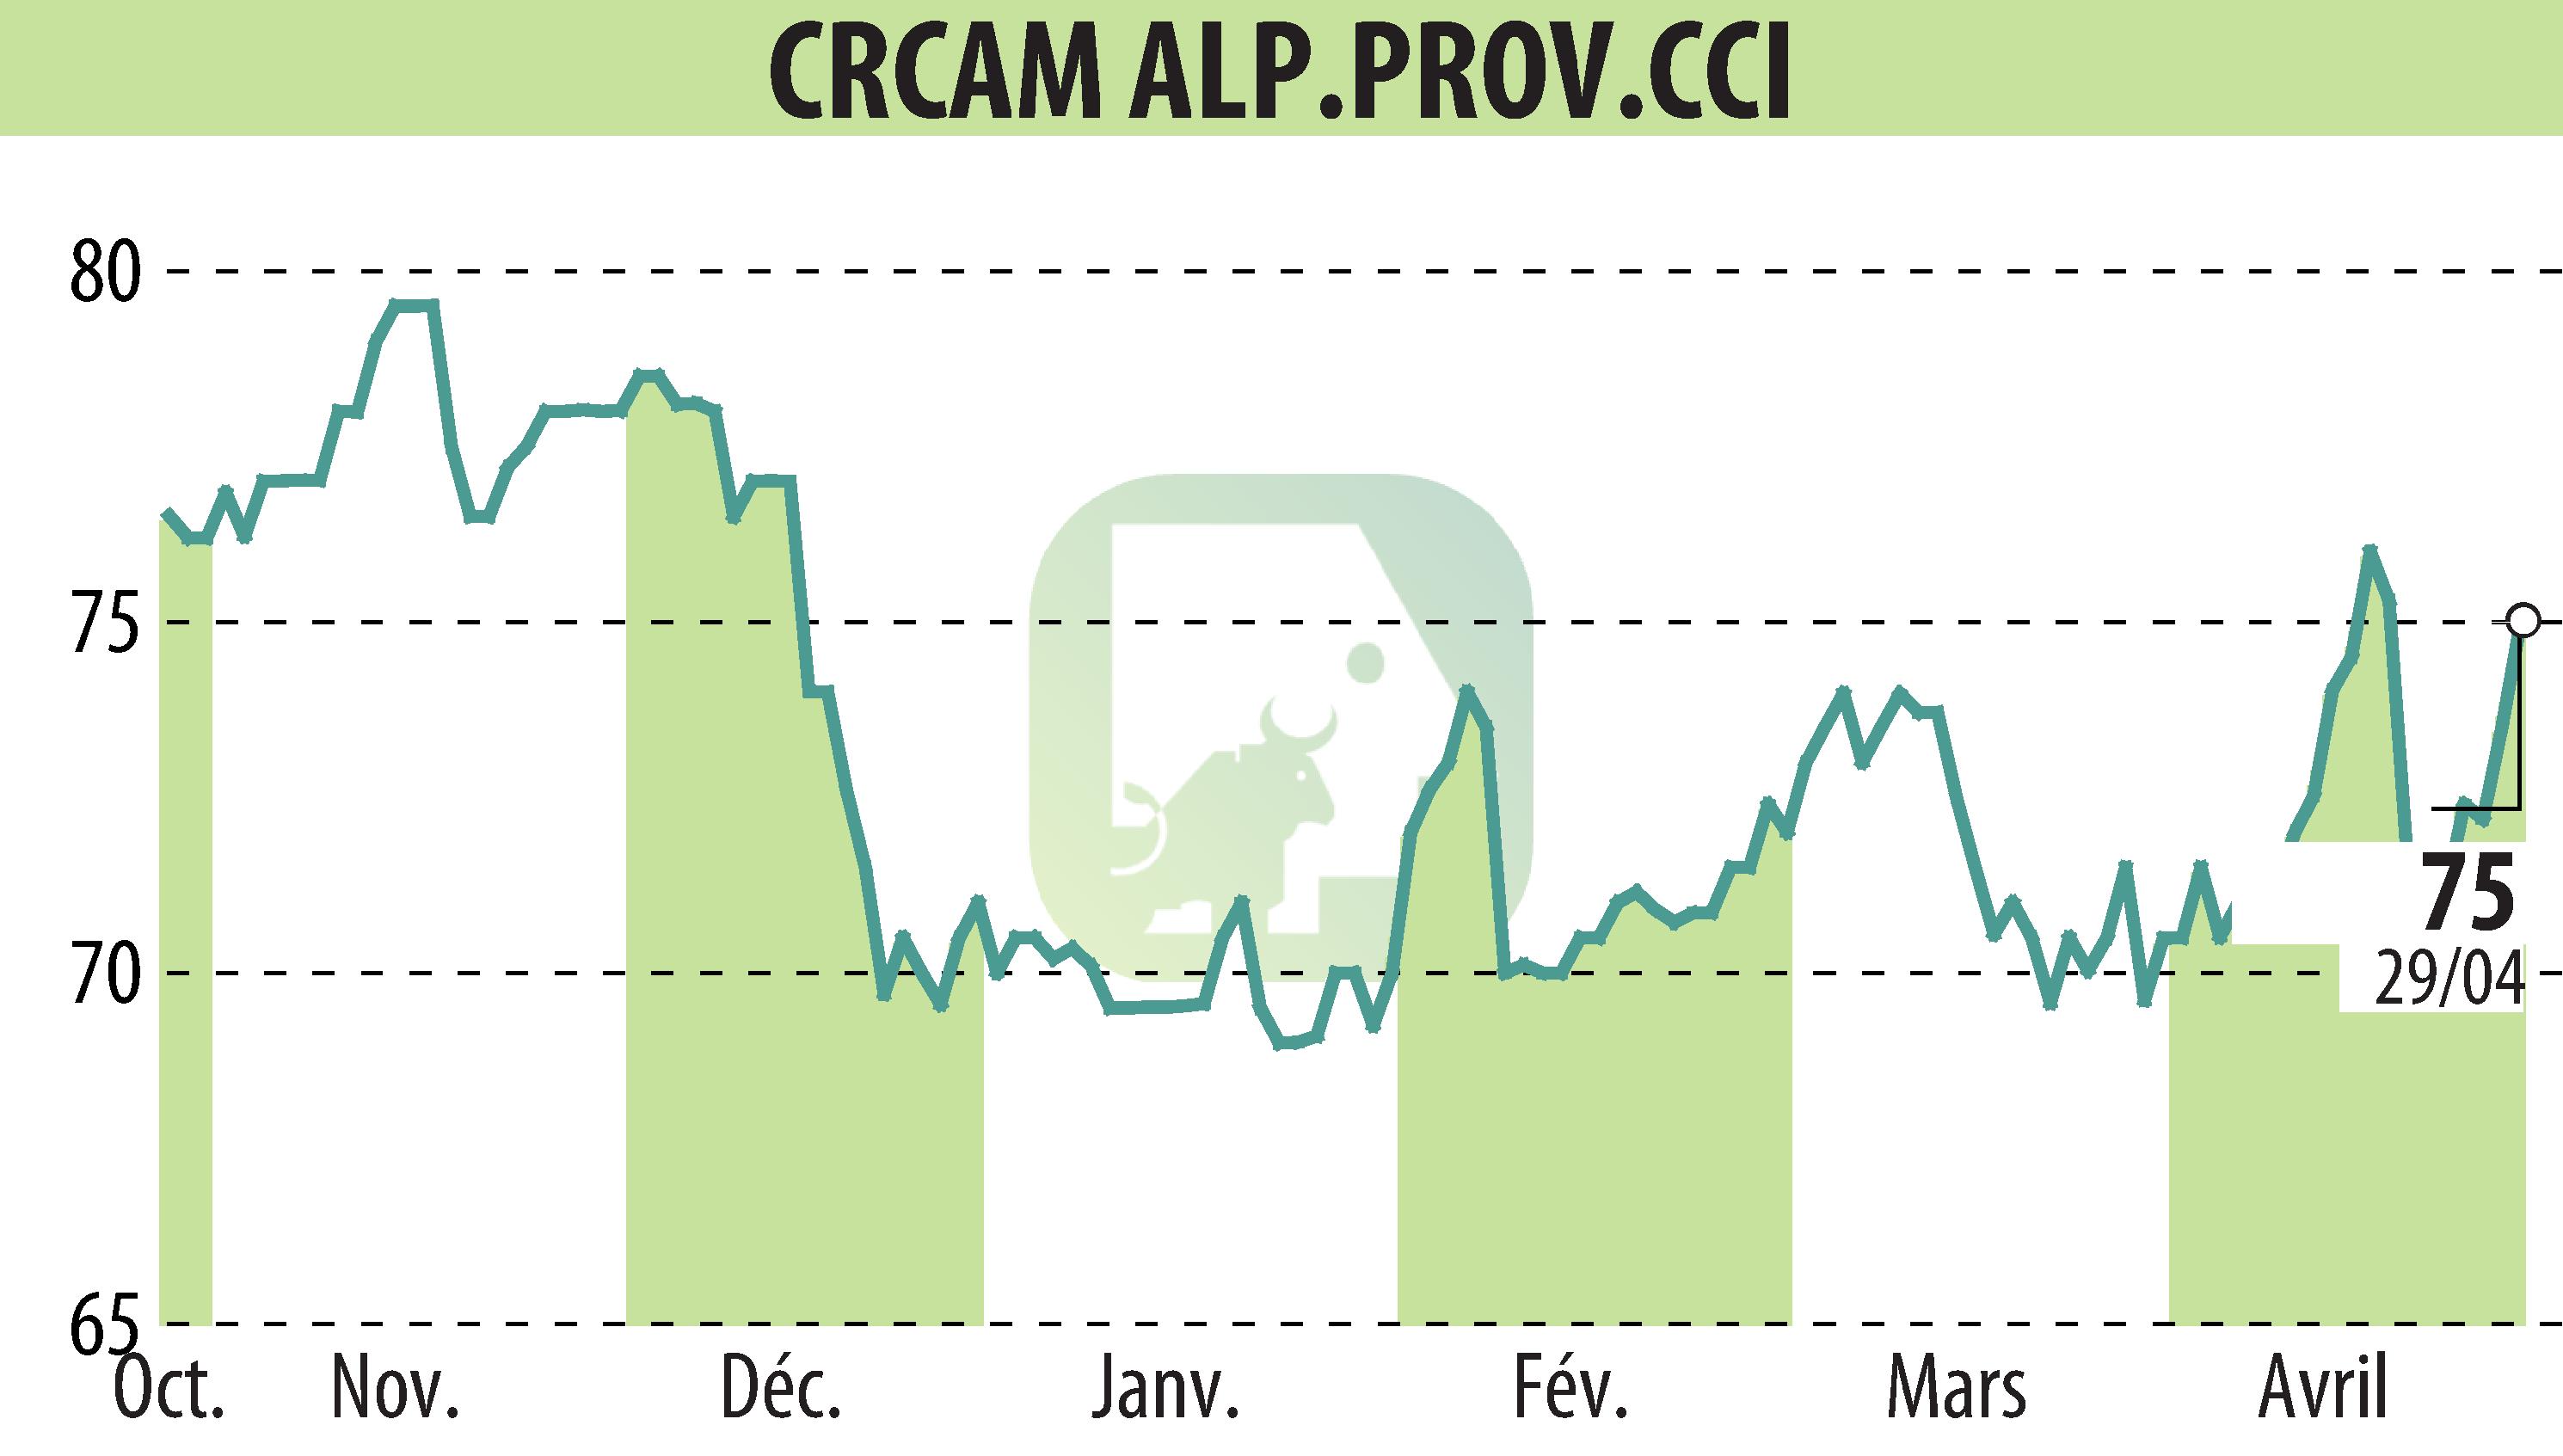 Stock price chart of CREDIT AGRICOLE ALPES PROVENCE (EPA:CRAP) showing fluctuations.